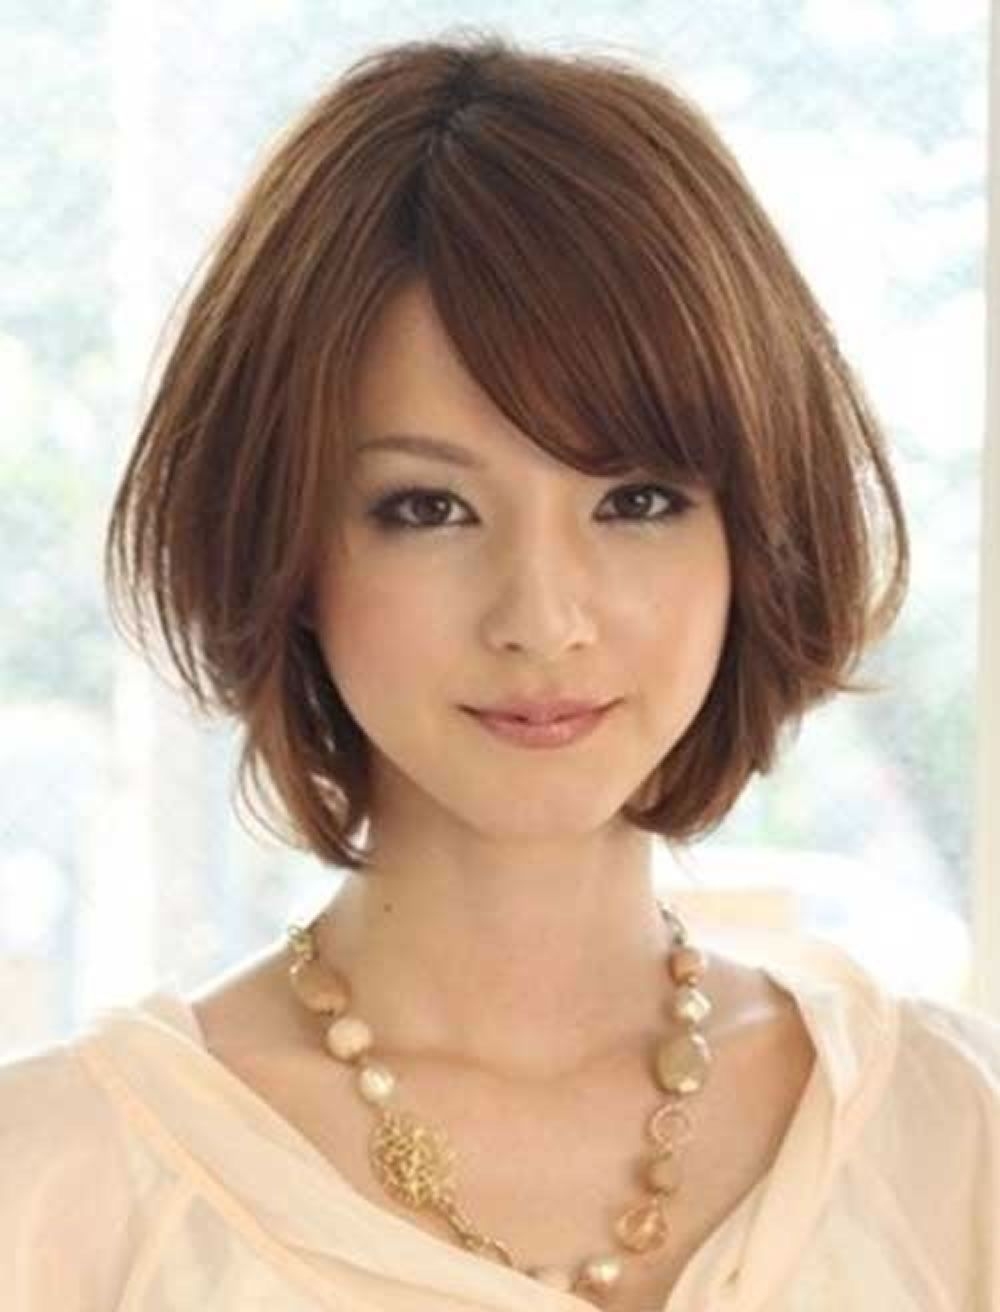 Short Hairstyles For Asian Women 2018 2019 In 2019 | Hair Cuts regarding Best Asian Short Hairstyles 2018 Female